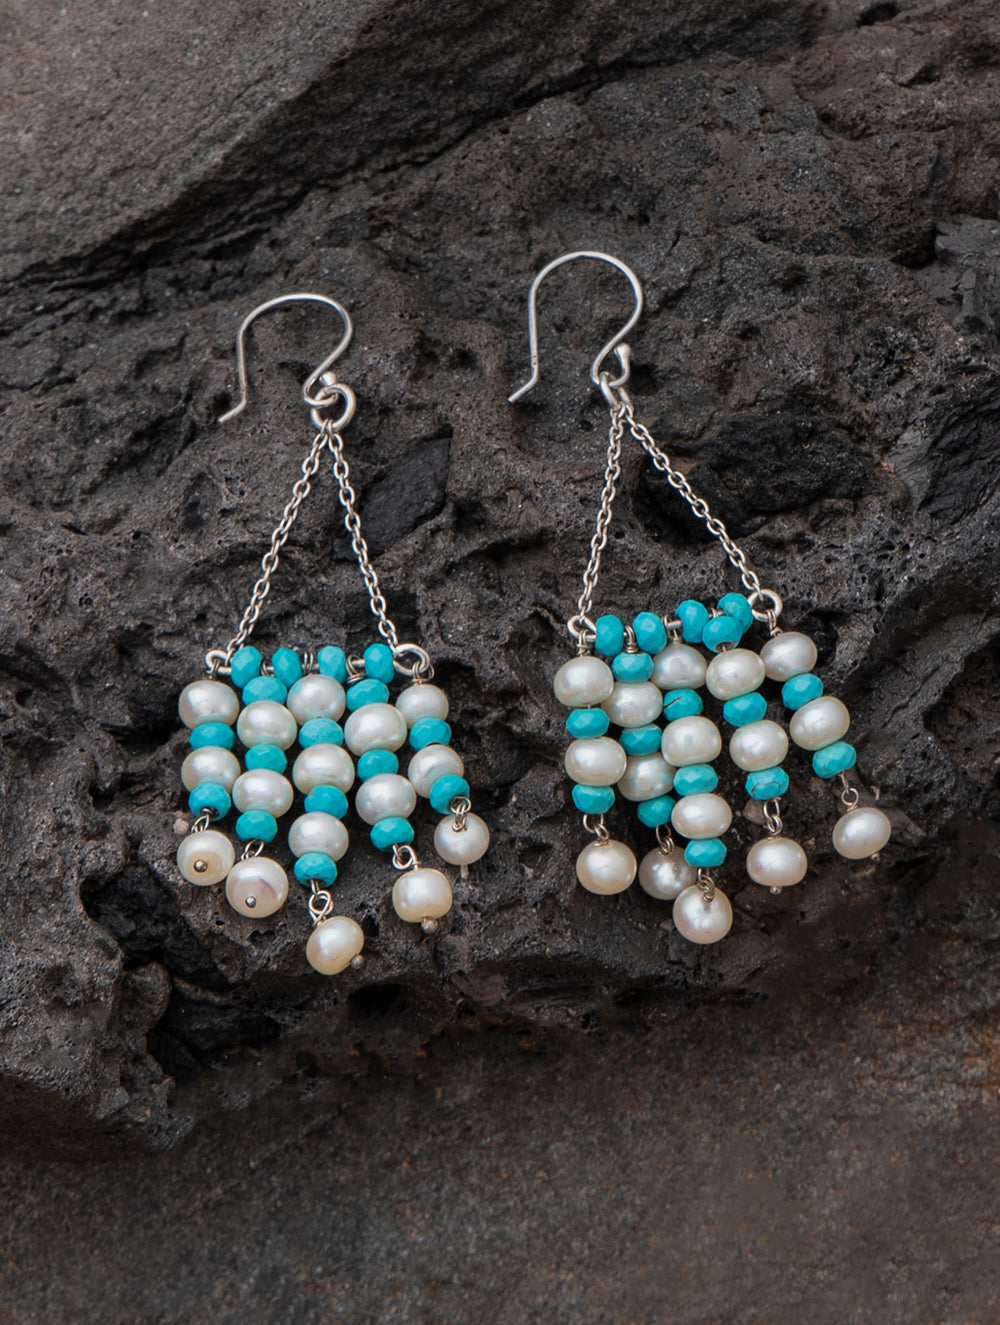 Load image into Gallery viewer, Pure Silver Earrings With Semi Precious Stones - Turquoise and Pearls Medley